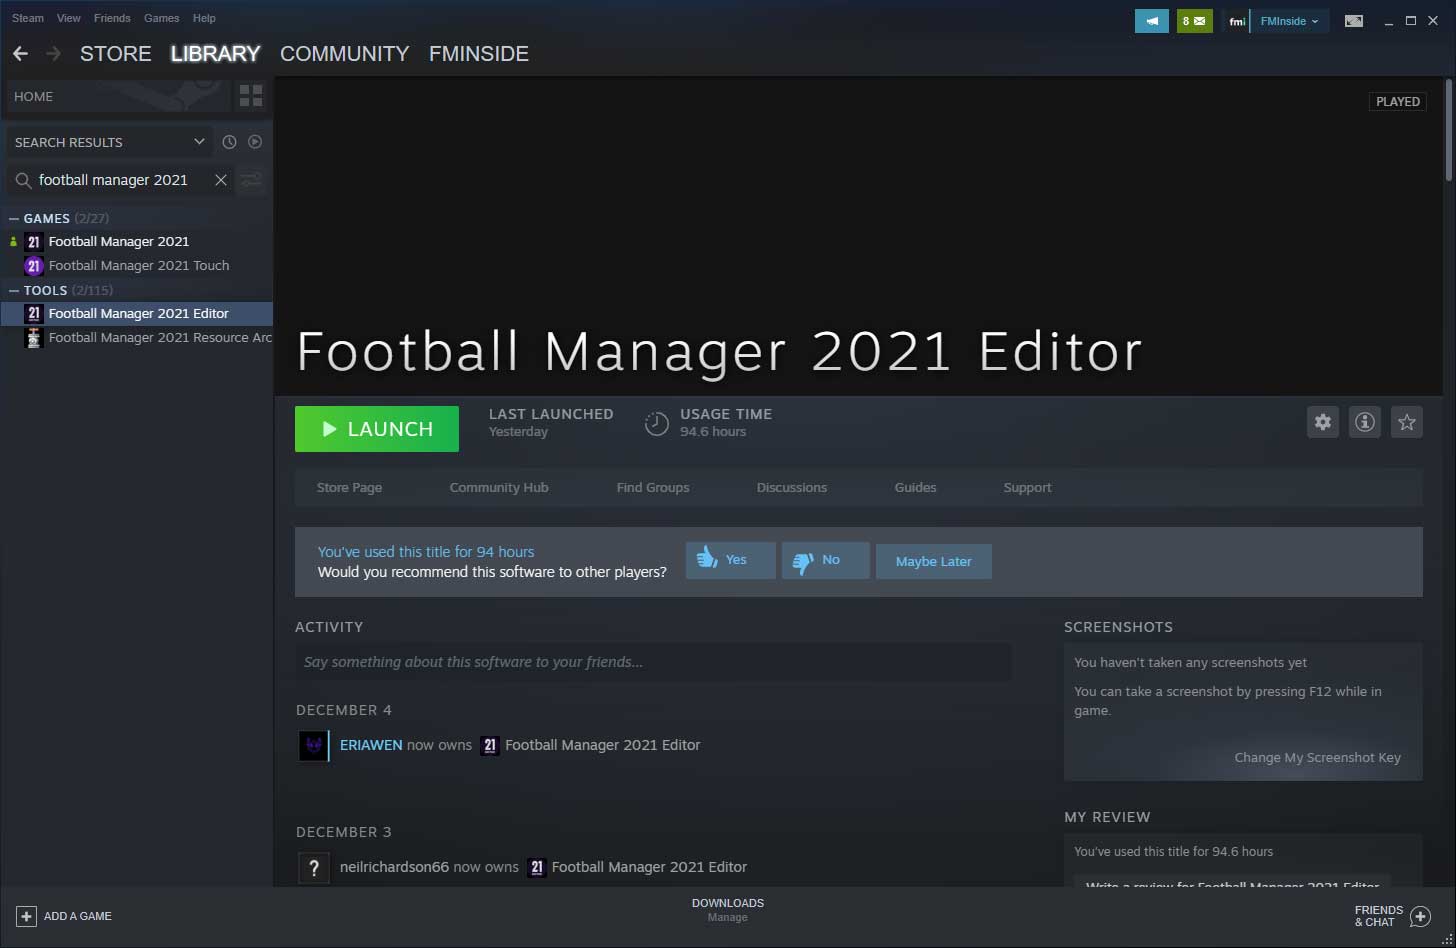 How To Download The Fm21 Pregame Editor Football Manager 21 Fm21 Fm21